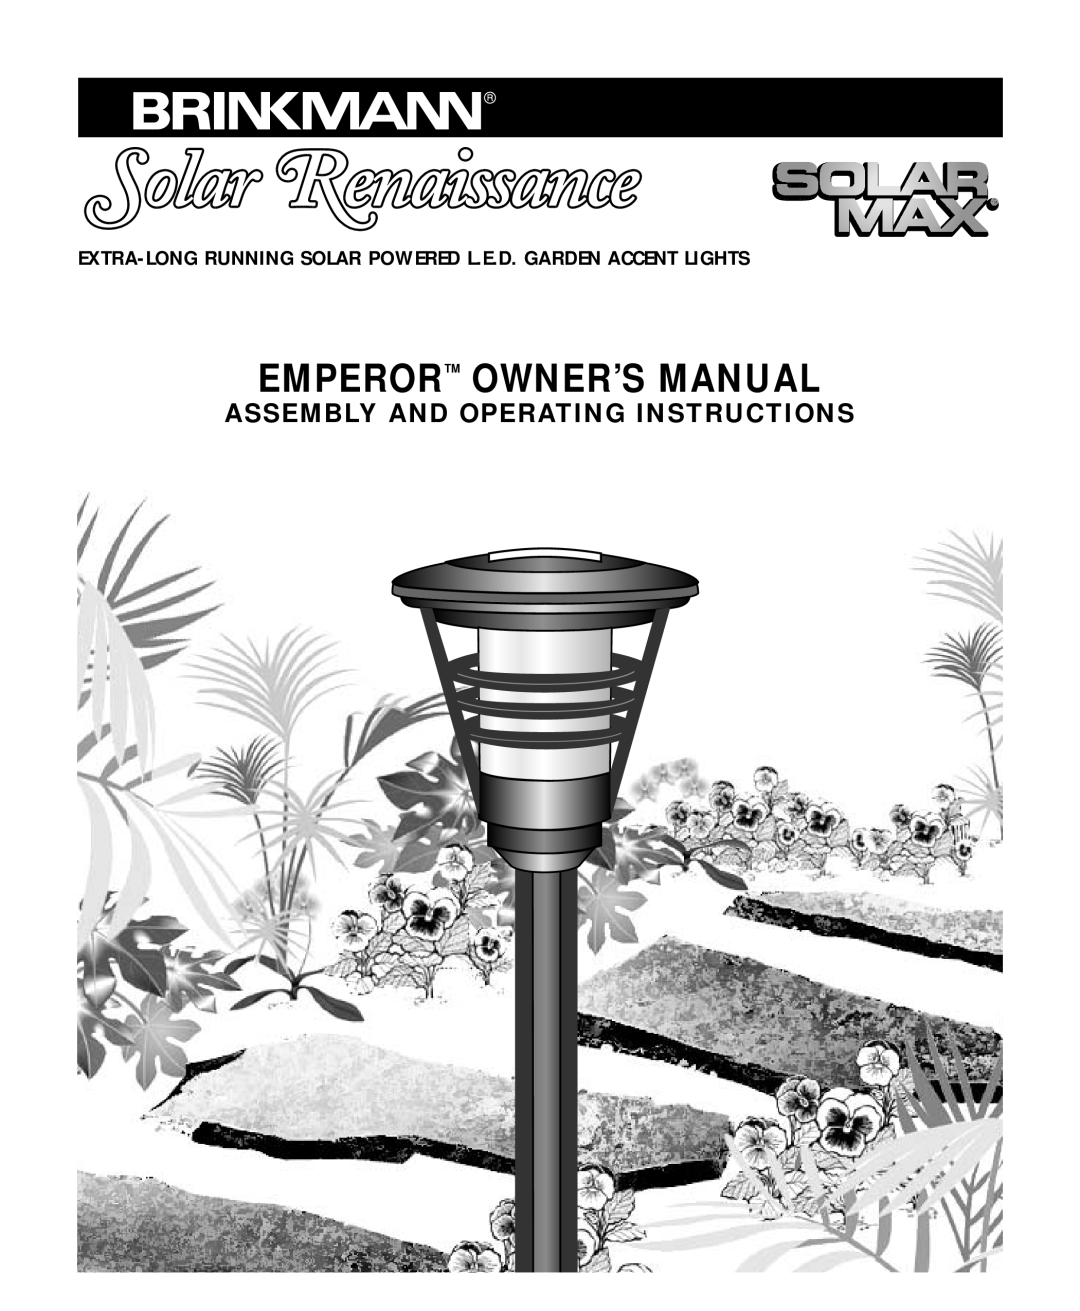 Brinkmann Solar Garden Accent Lights owner manual Assembly And Operating Instructions 